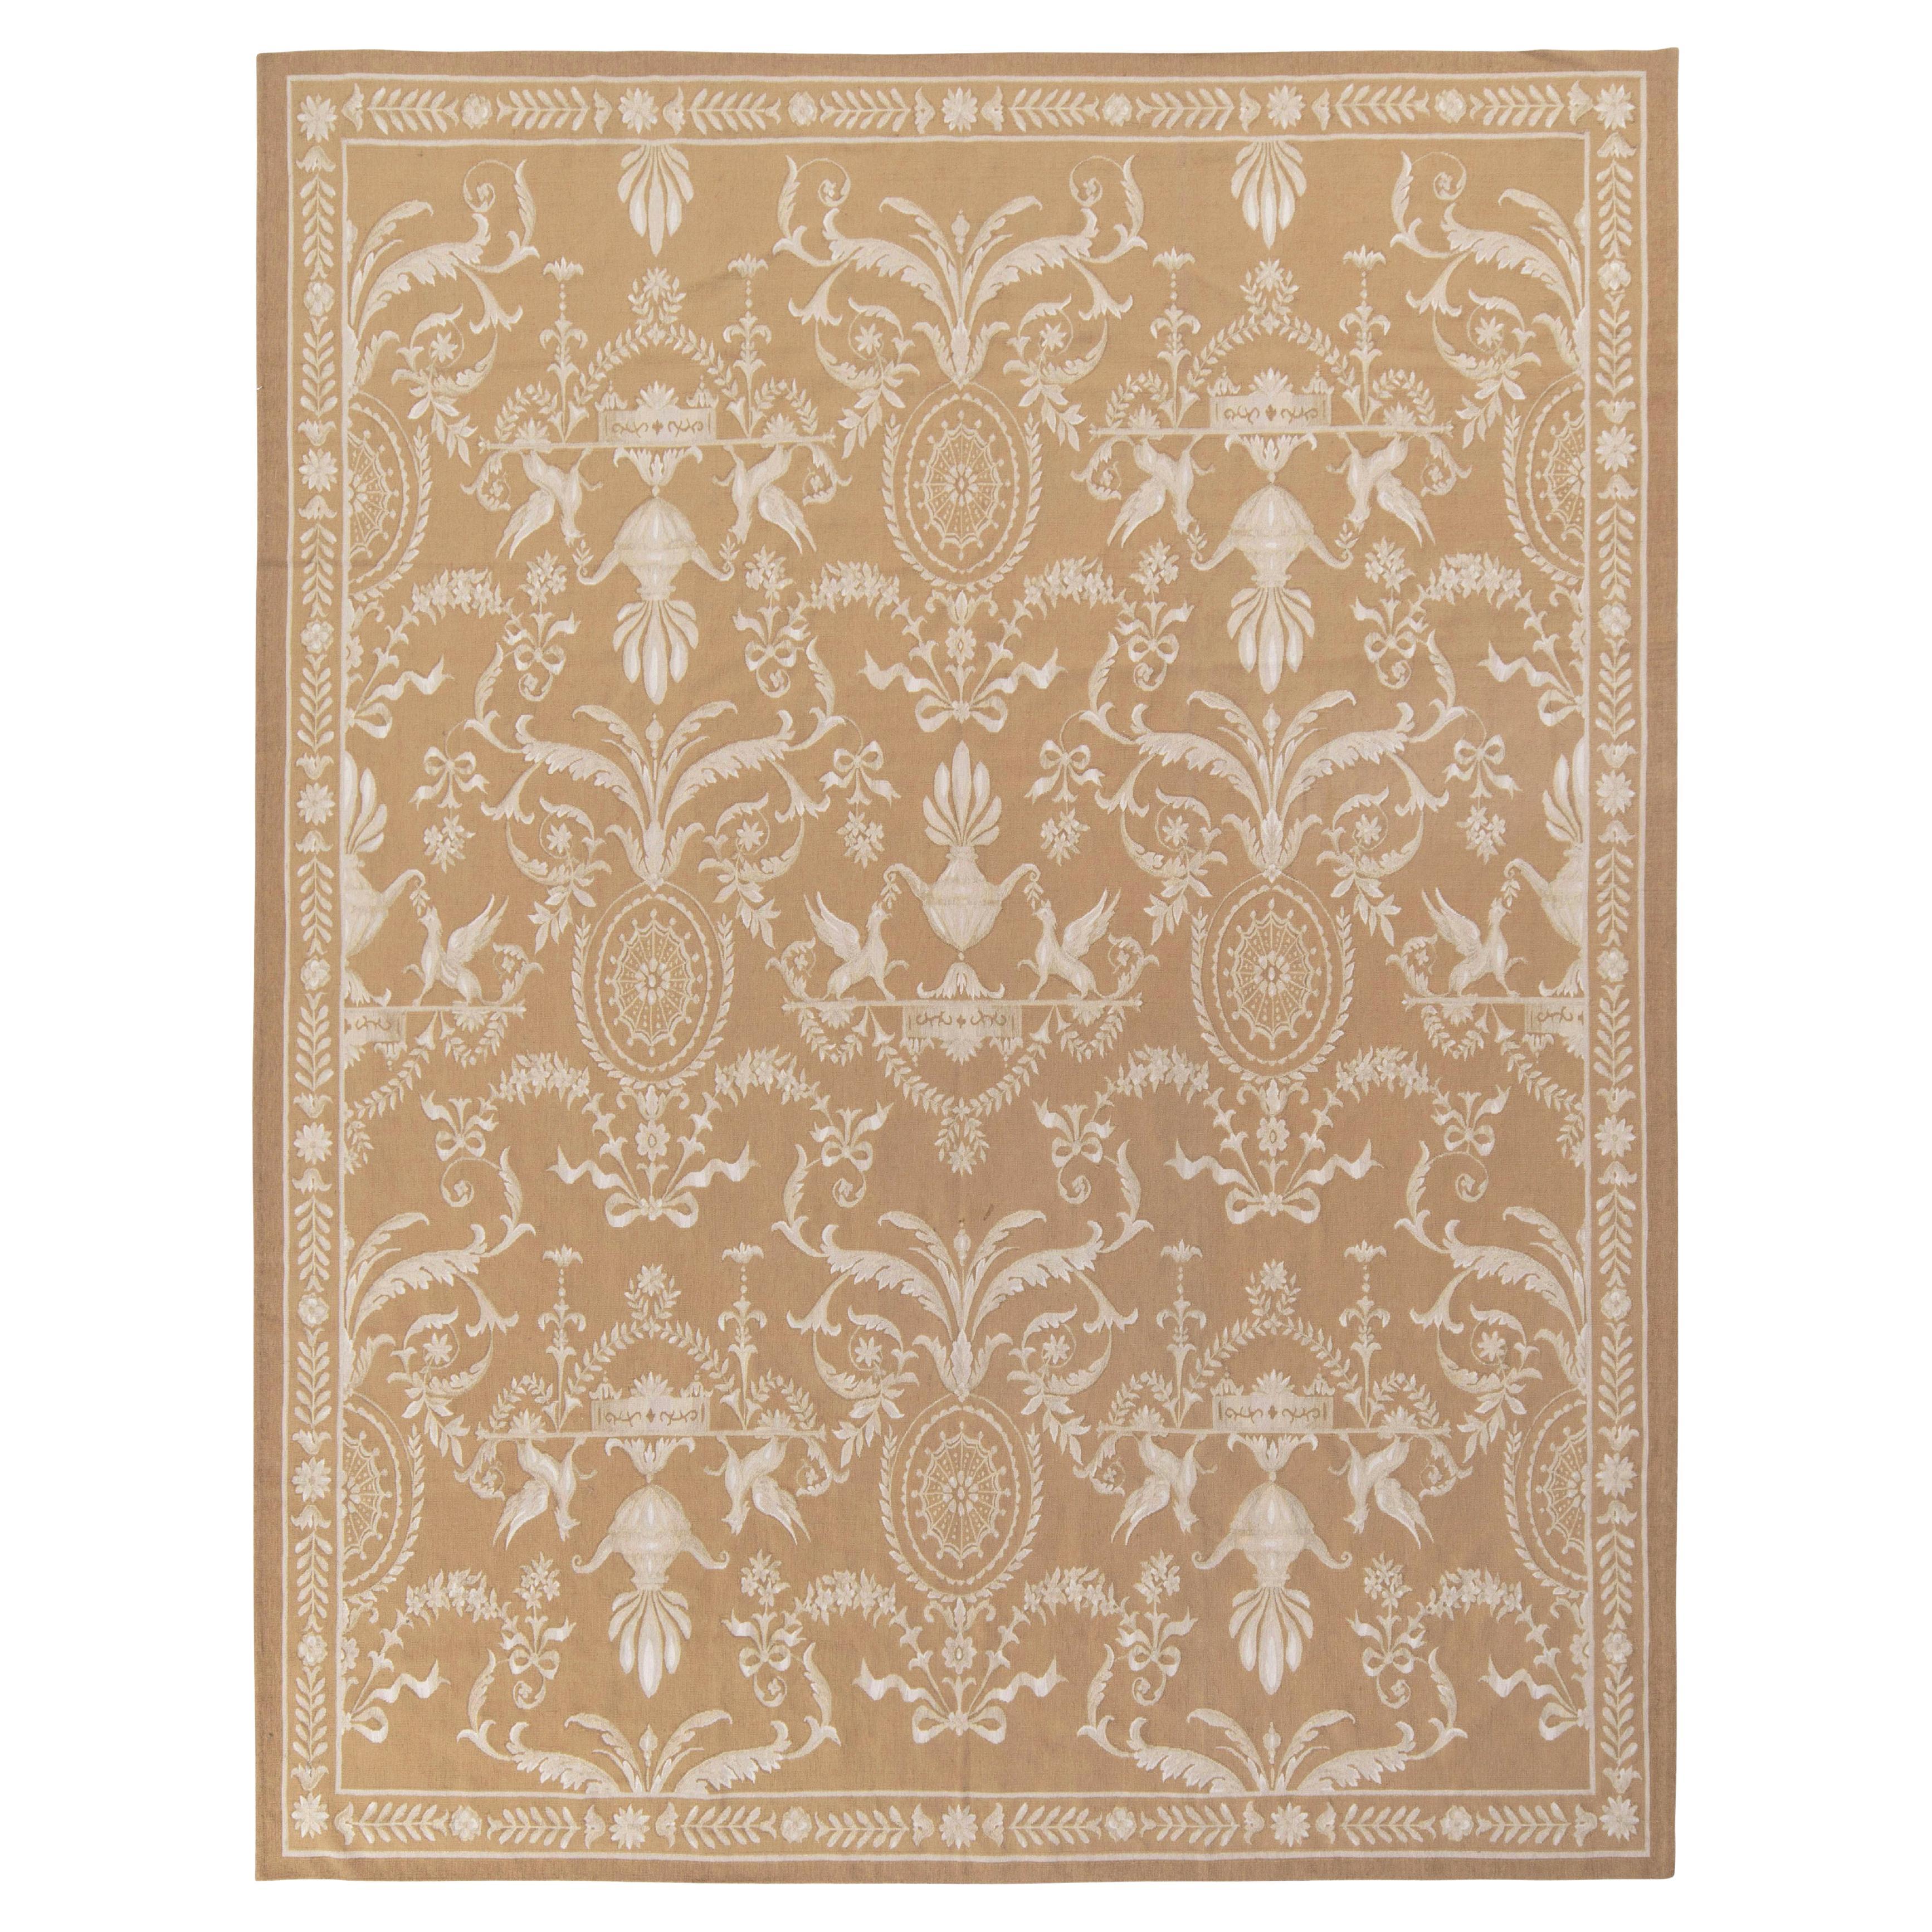 Rug & Kilim’s Aubusson Style Flat Weave in Beige-Brown, White Floral Pattern For Sale